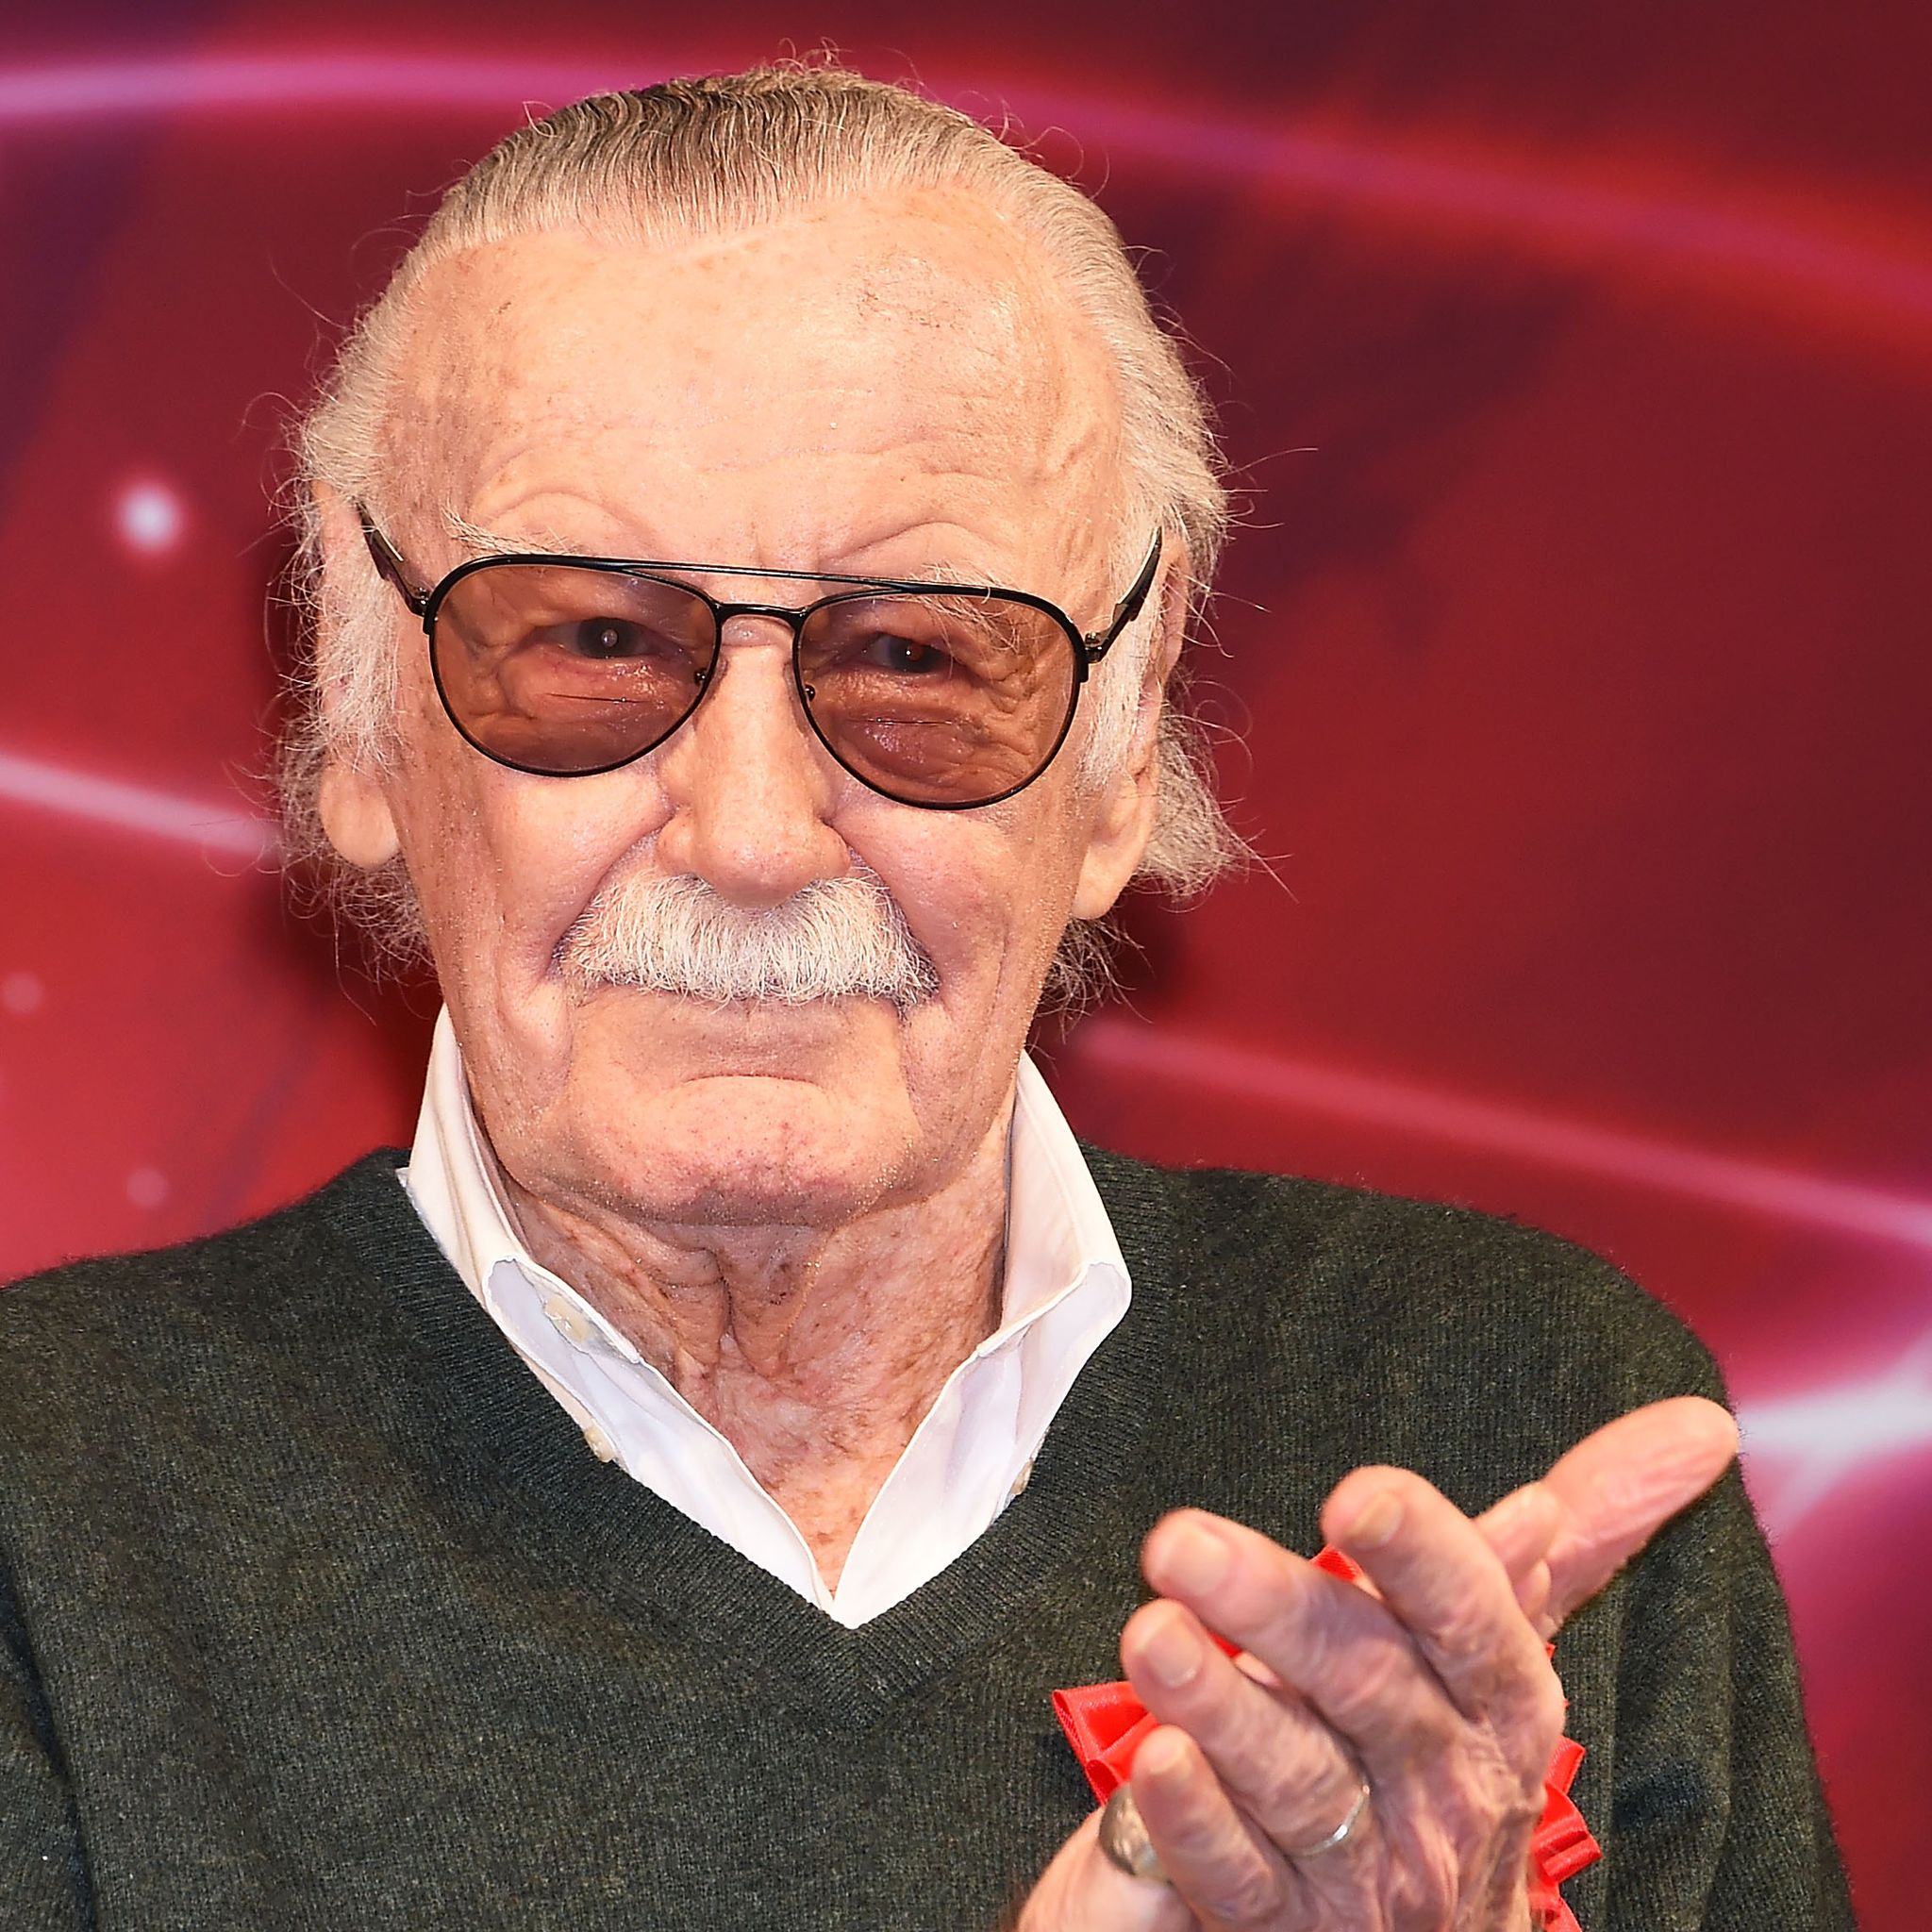 stan lee attends the opening day of tokyo comic con, 2017